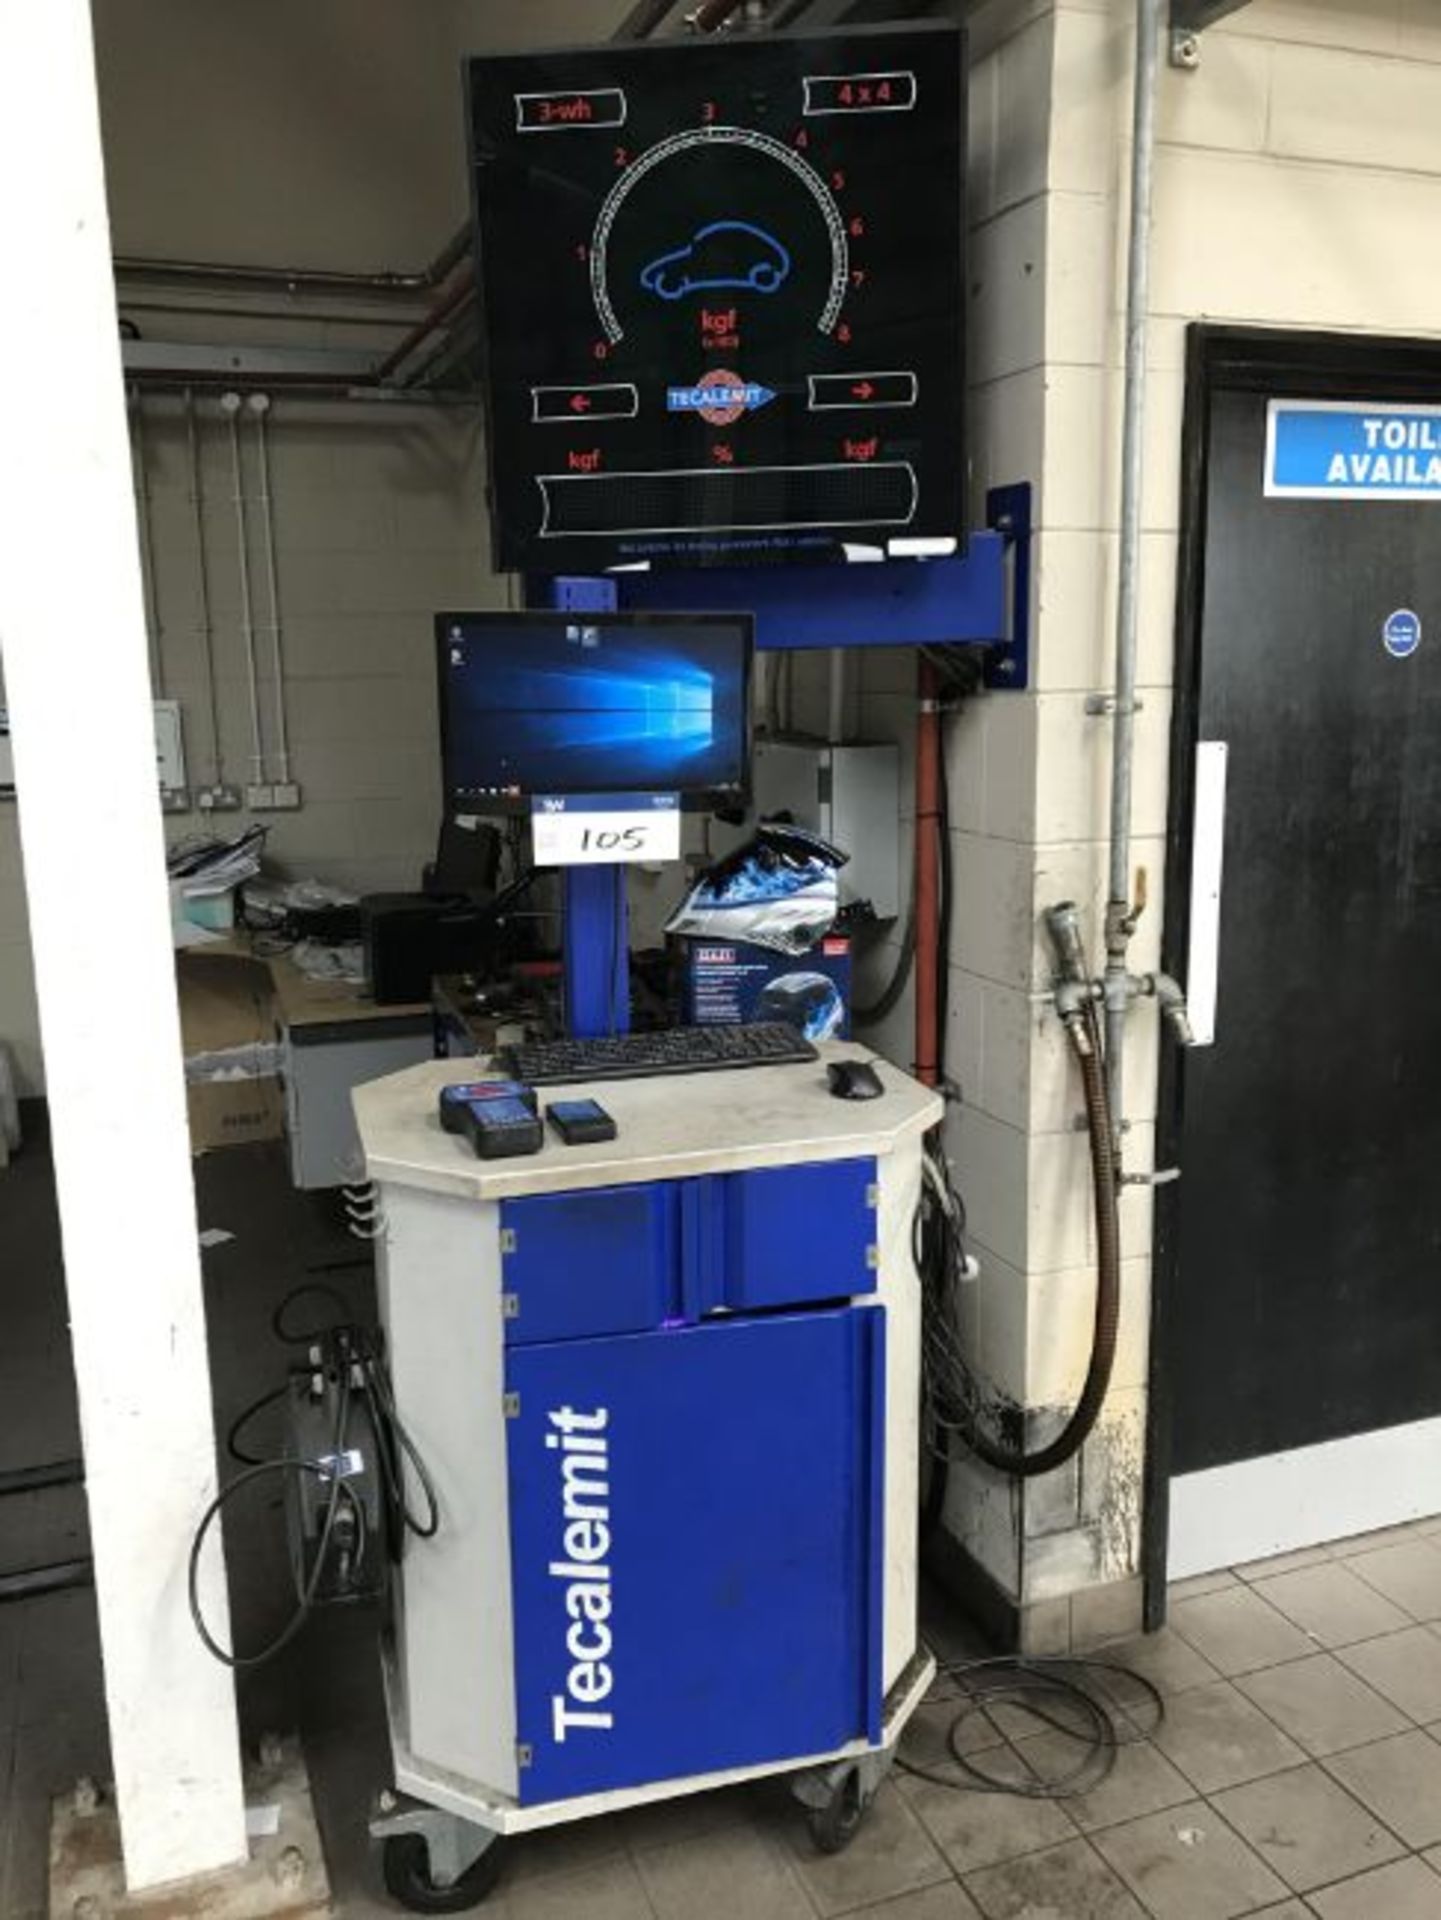 Tecalemit Rolling Road Brake Tester and AVL d-Link gas emission analyser with display read out - Image 4 of 10